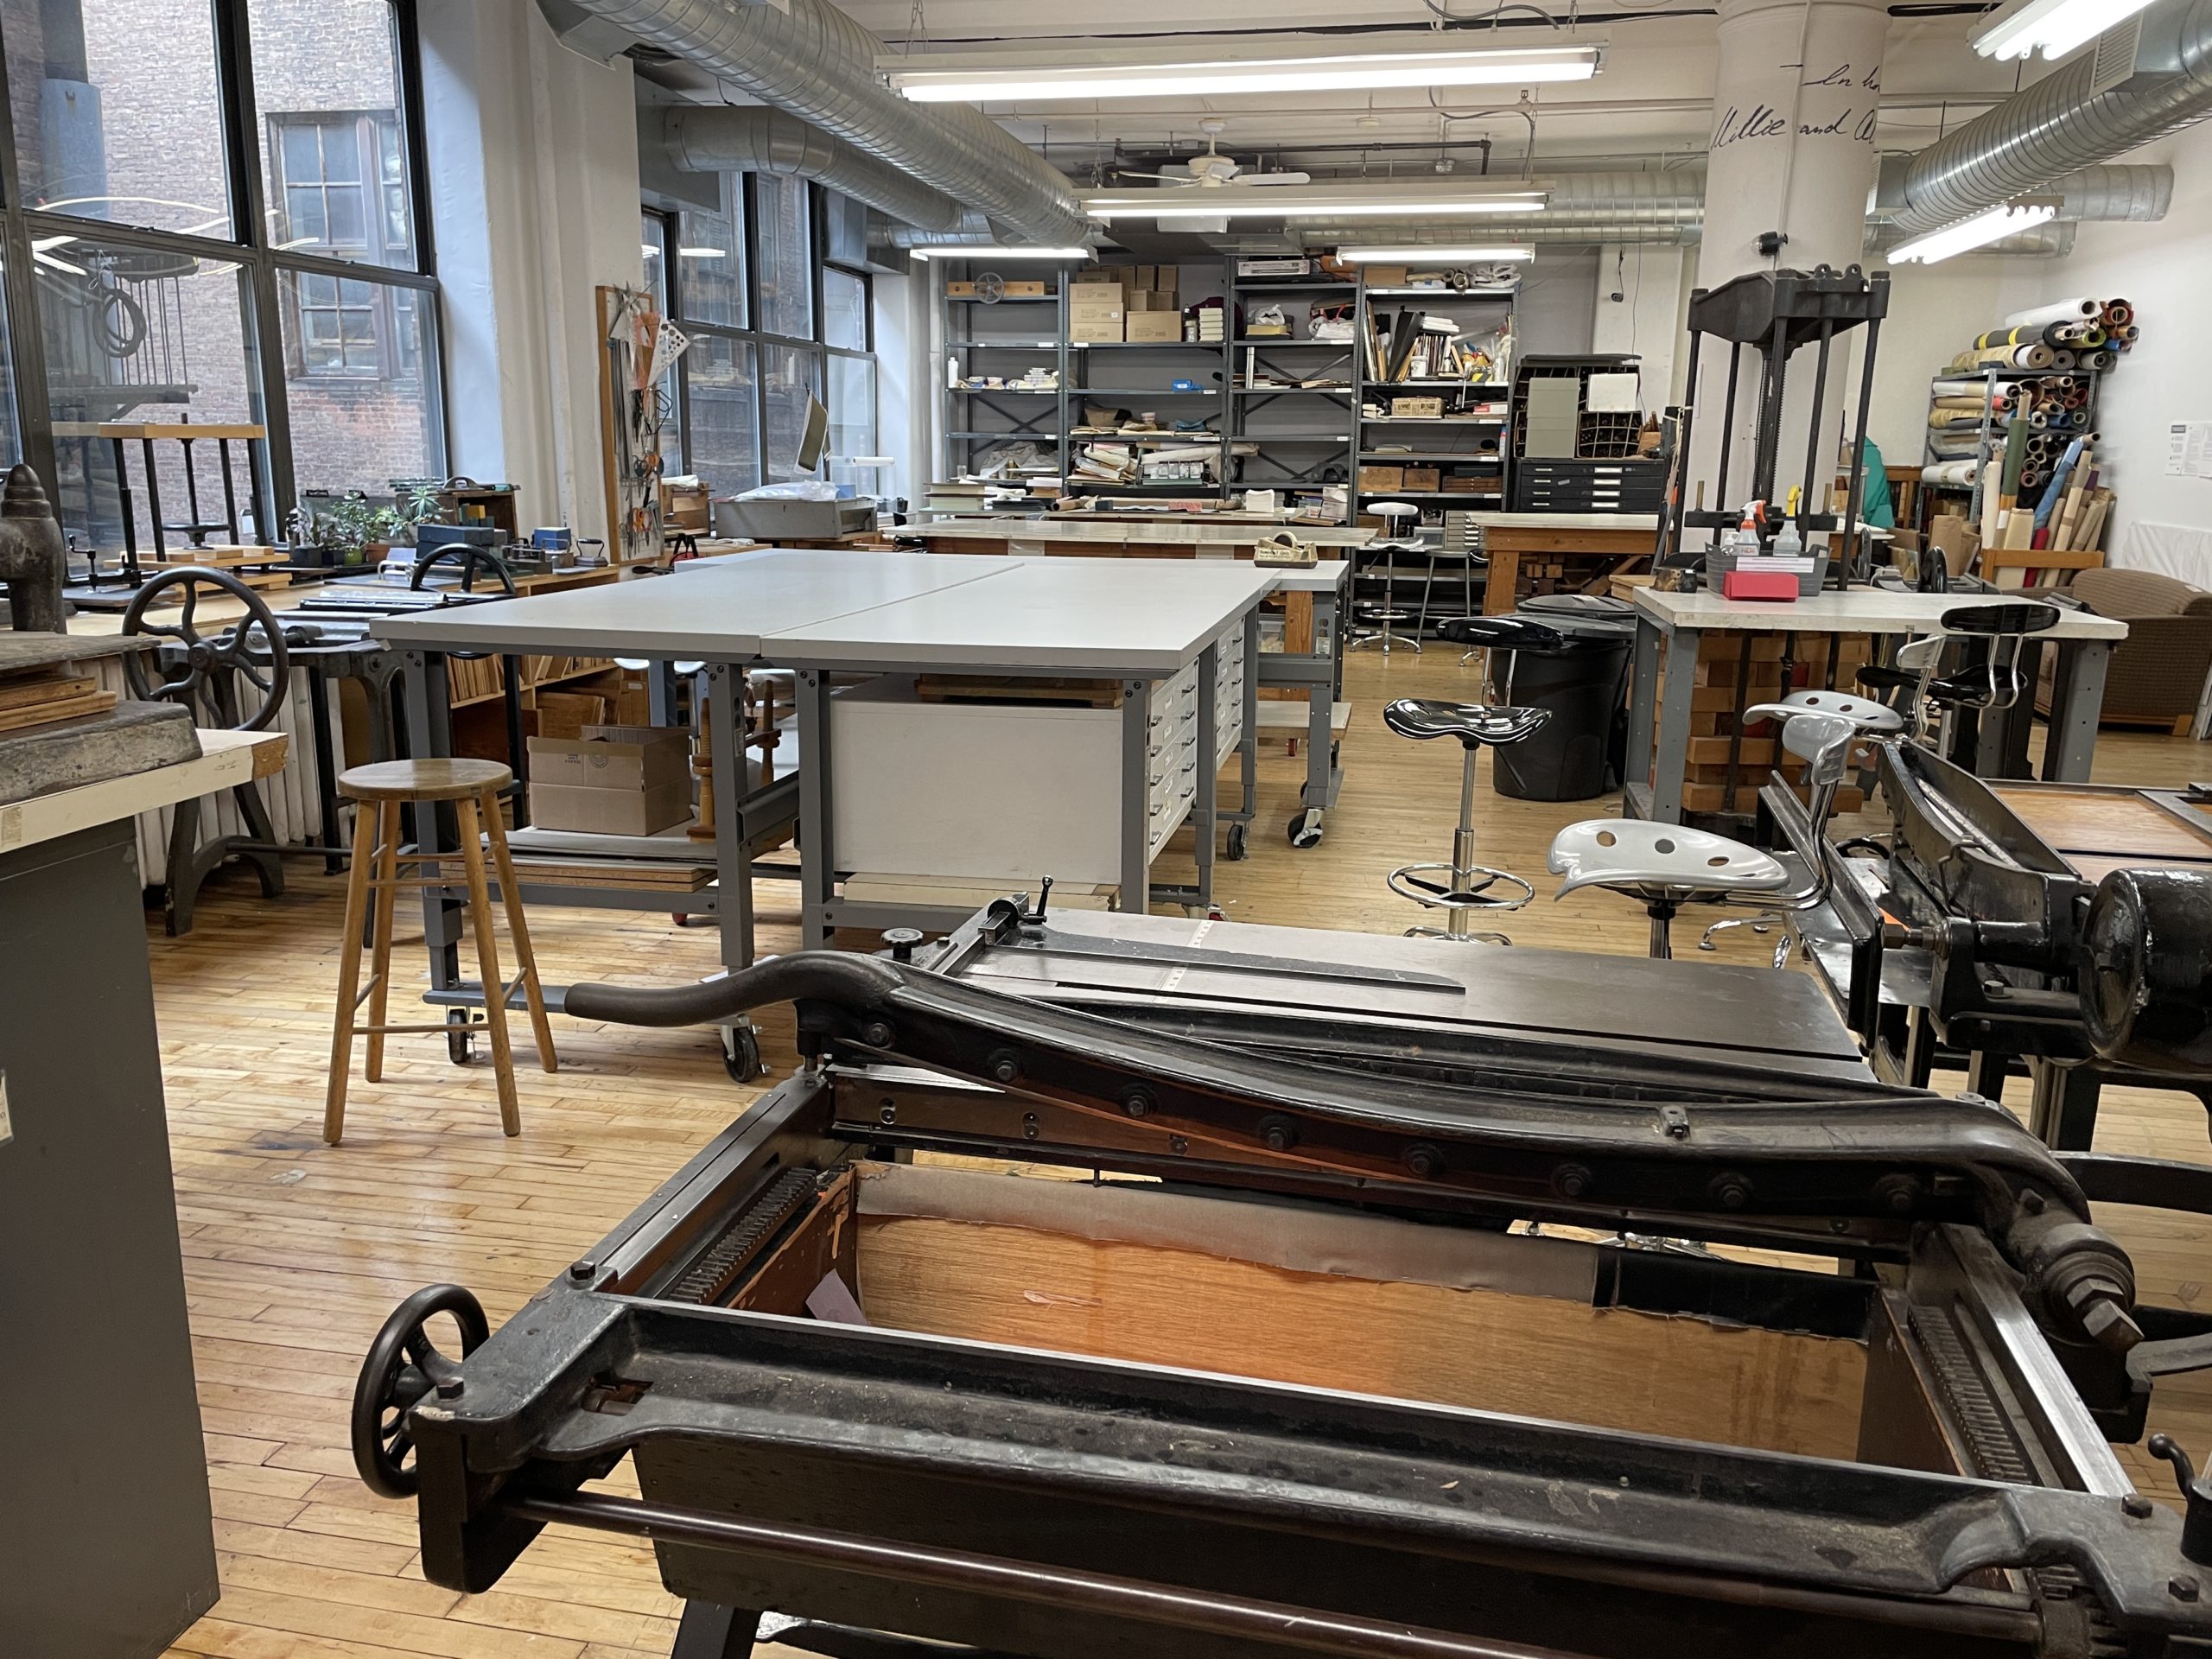 bookbindery with boardshears, tables, and many hand tools and presses